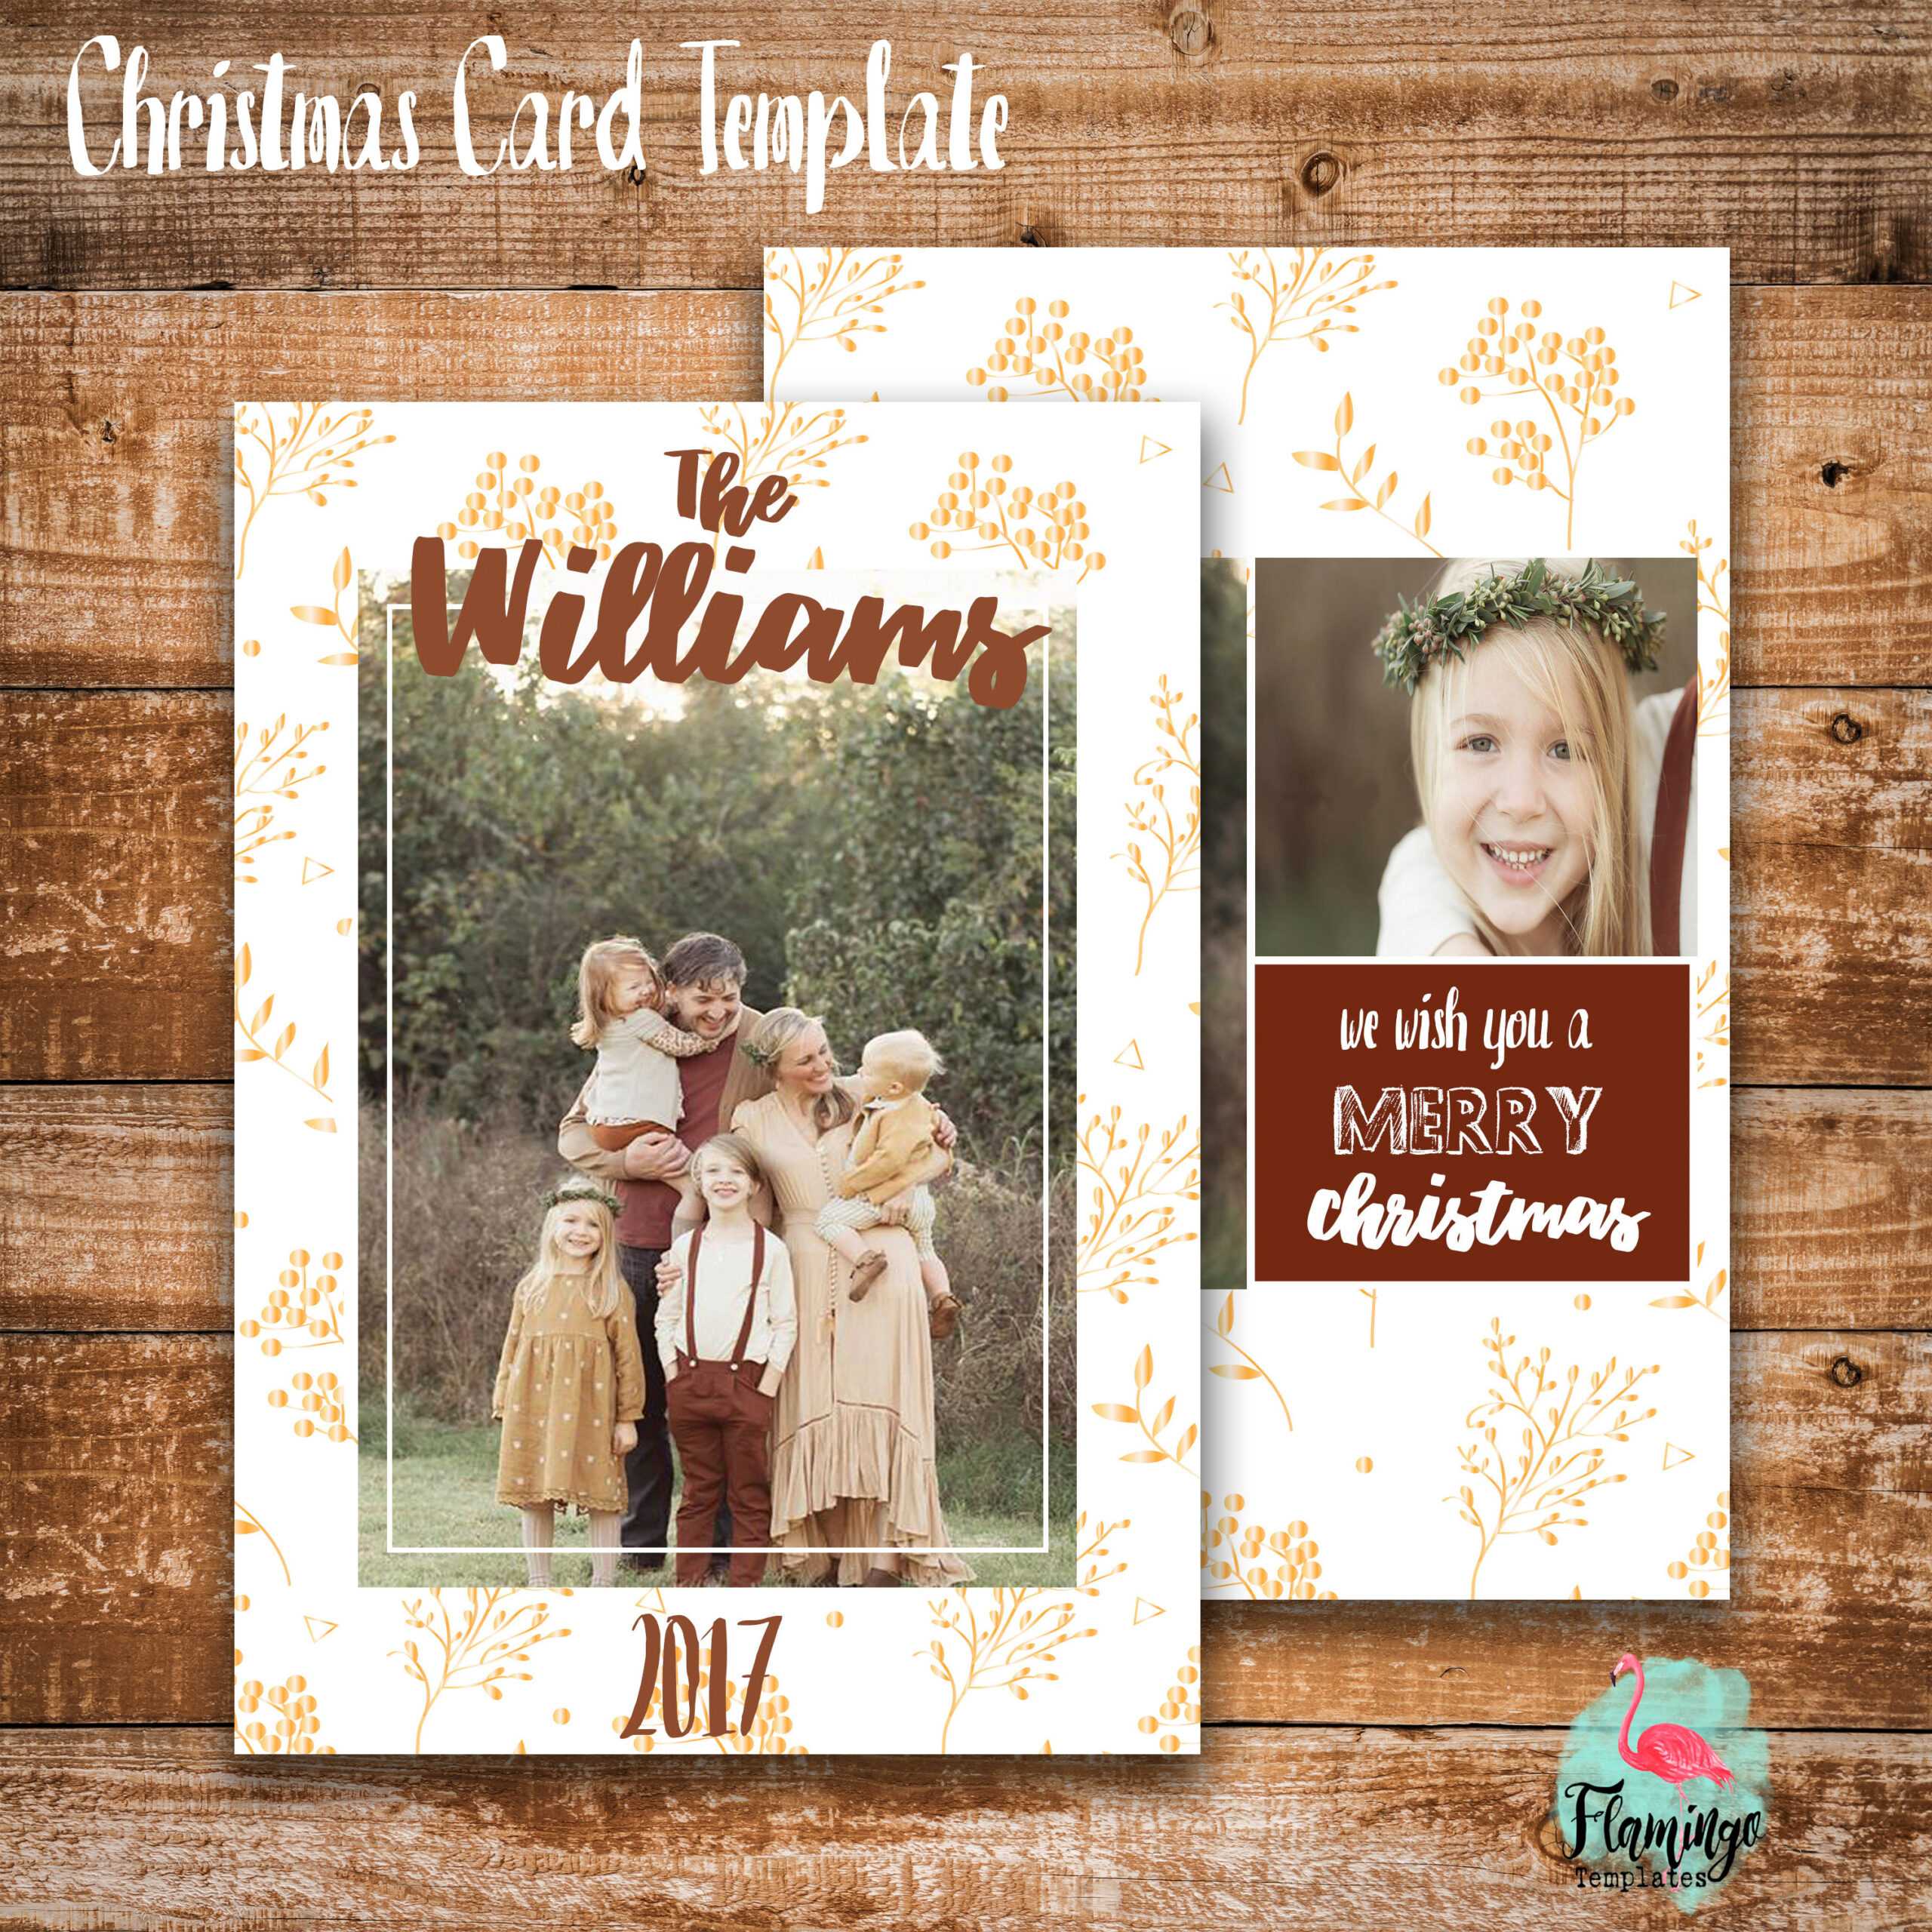 Christmas Card Template,christmas Card Templates For Photographers,holiday  Card Template,christmas Card Printable,christmas Card Photo In Holiday Card Templates For Photographers